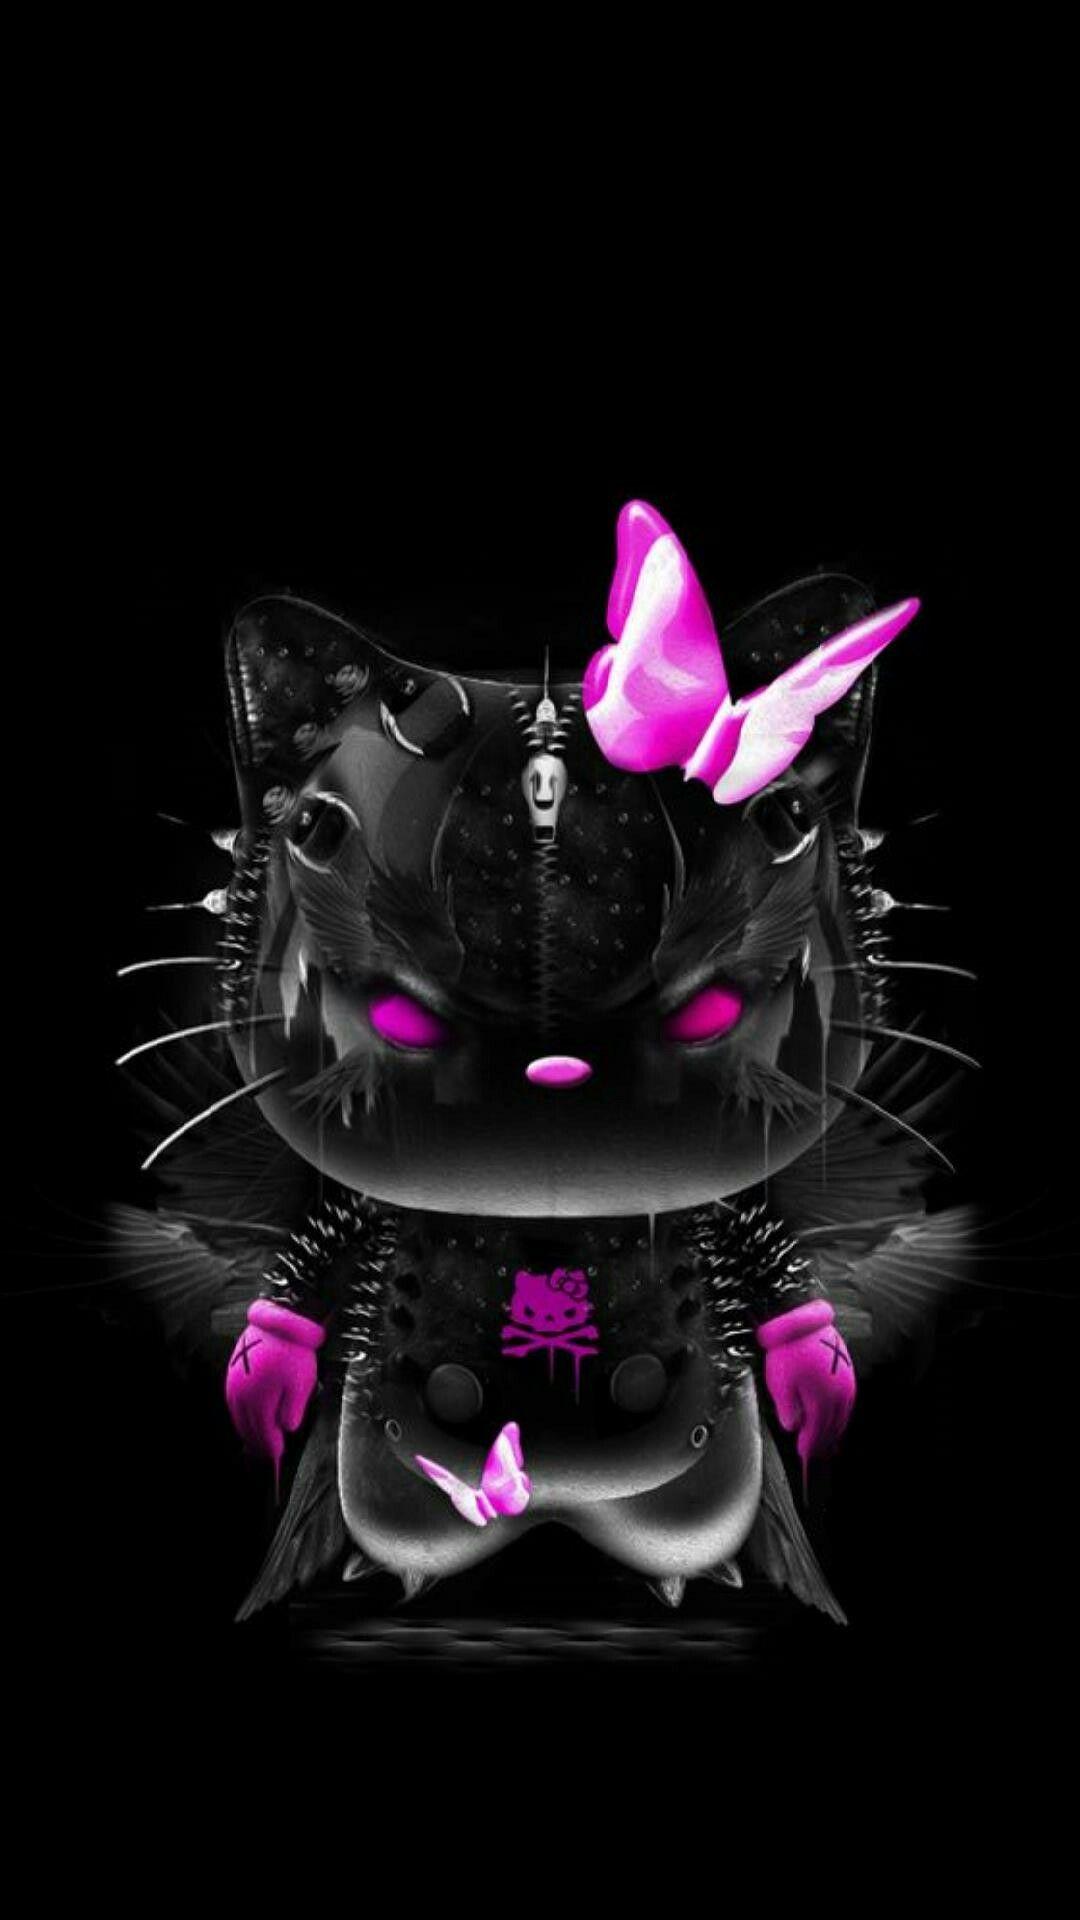 Hello Kitty wallpaper by JustDee5905  Download on ZEDGE  8817